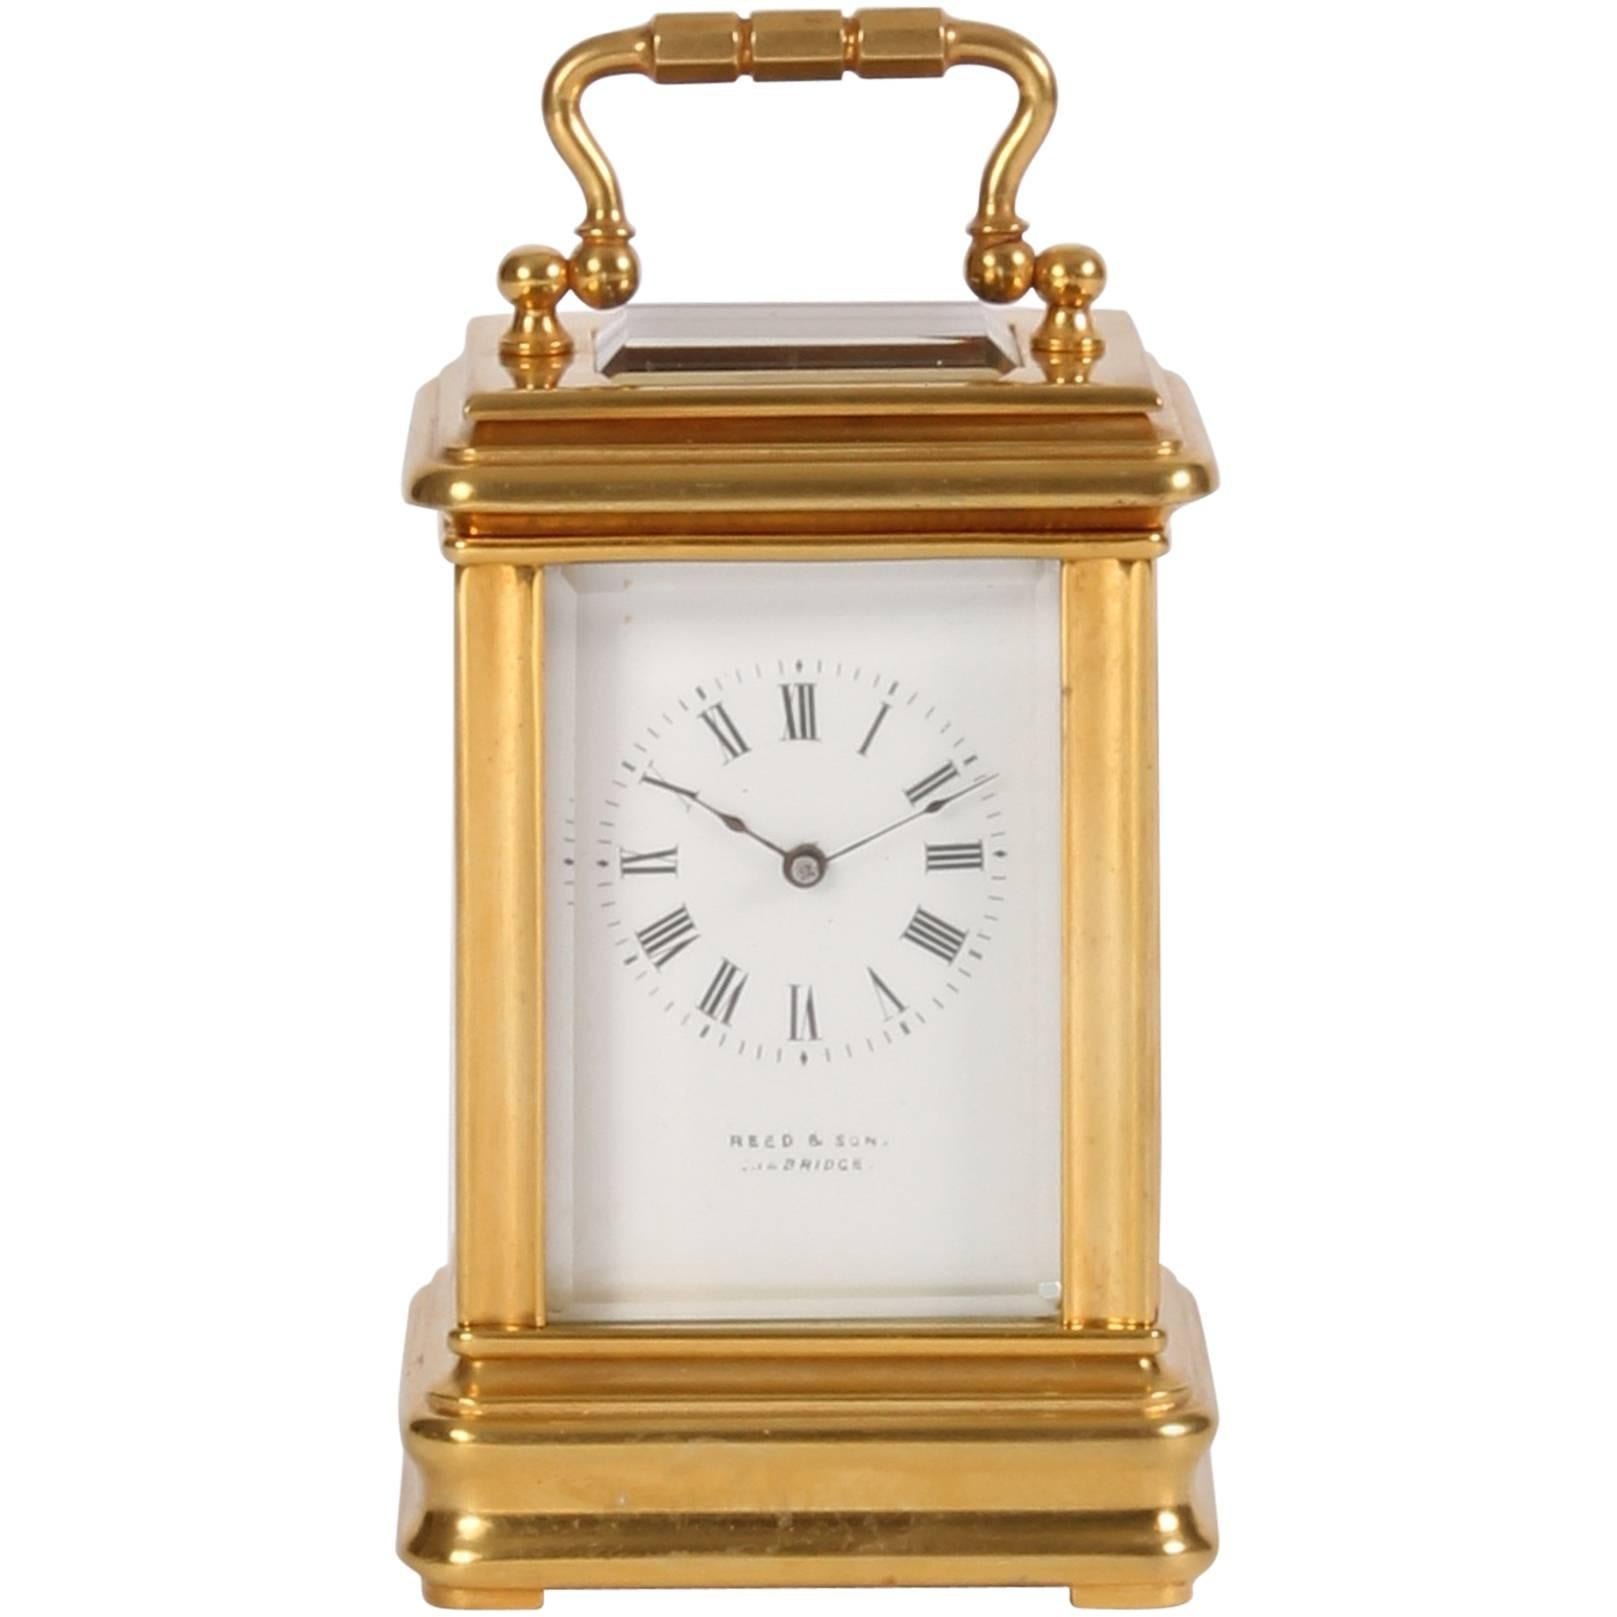 Retailed French Miniature Gilt Brass Timepiece, by Reed & Son, circa 1880 For Sale